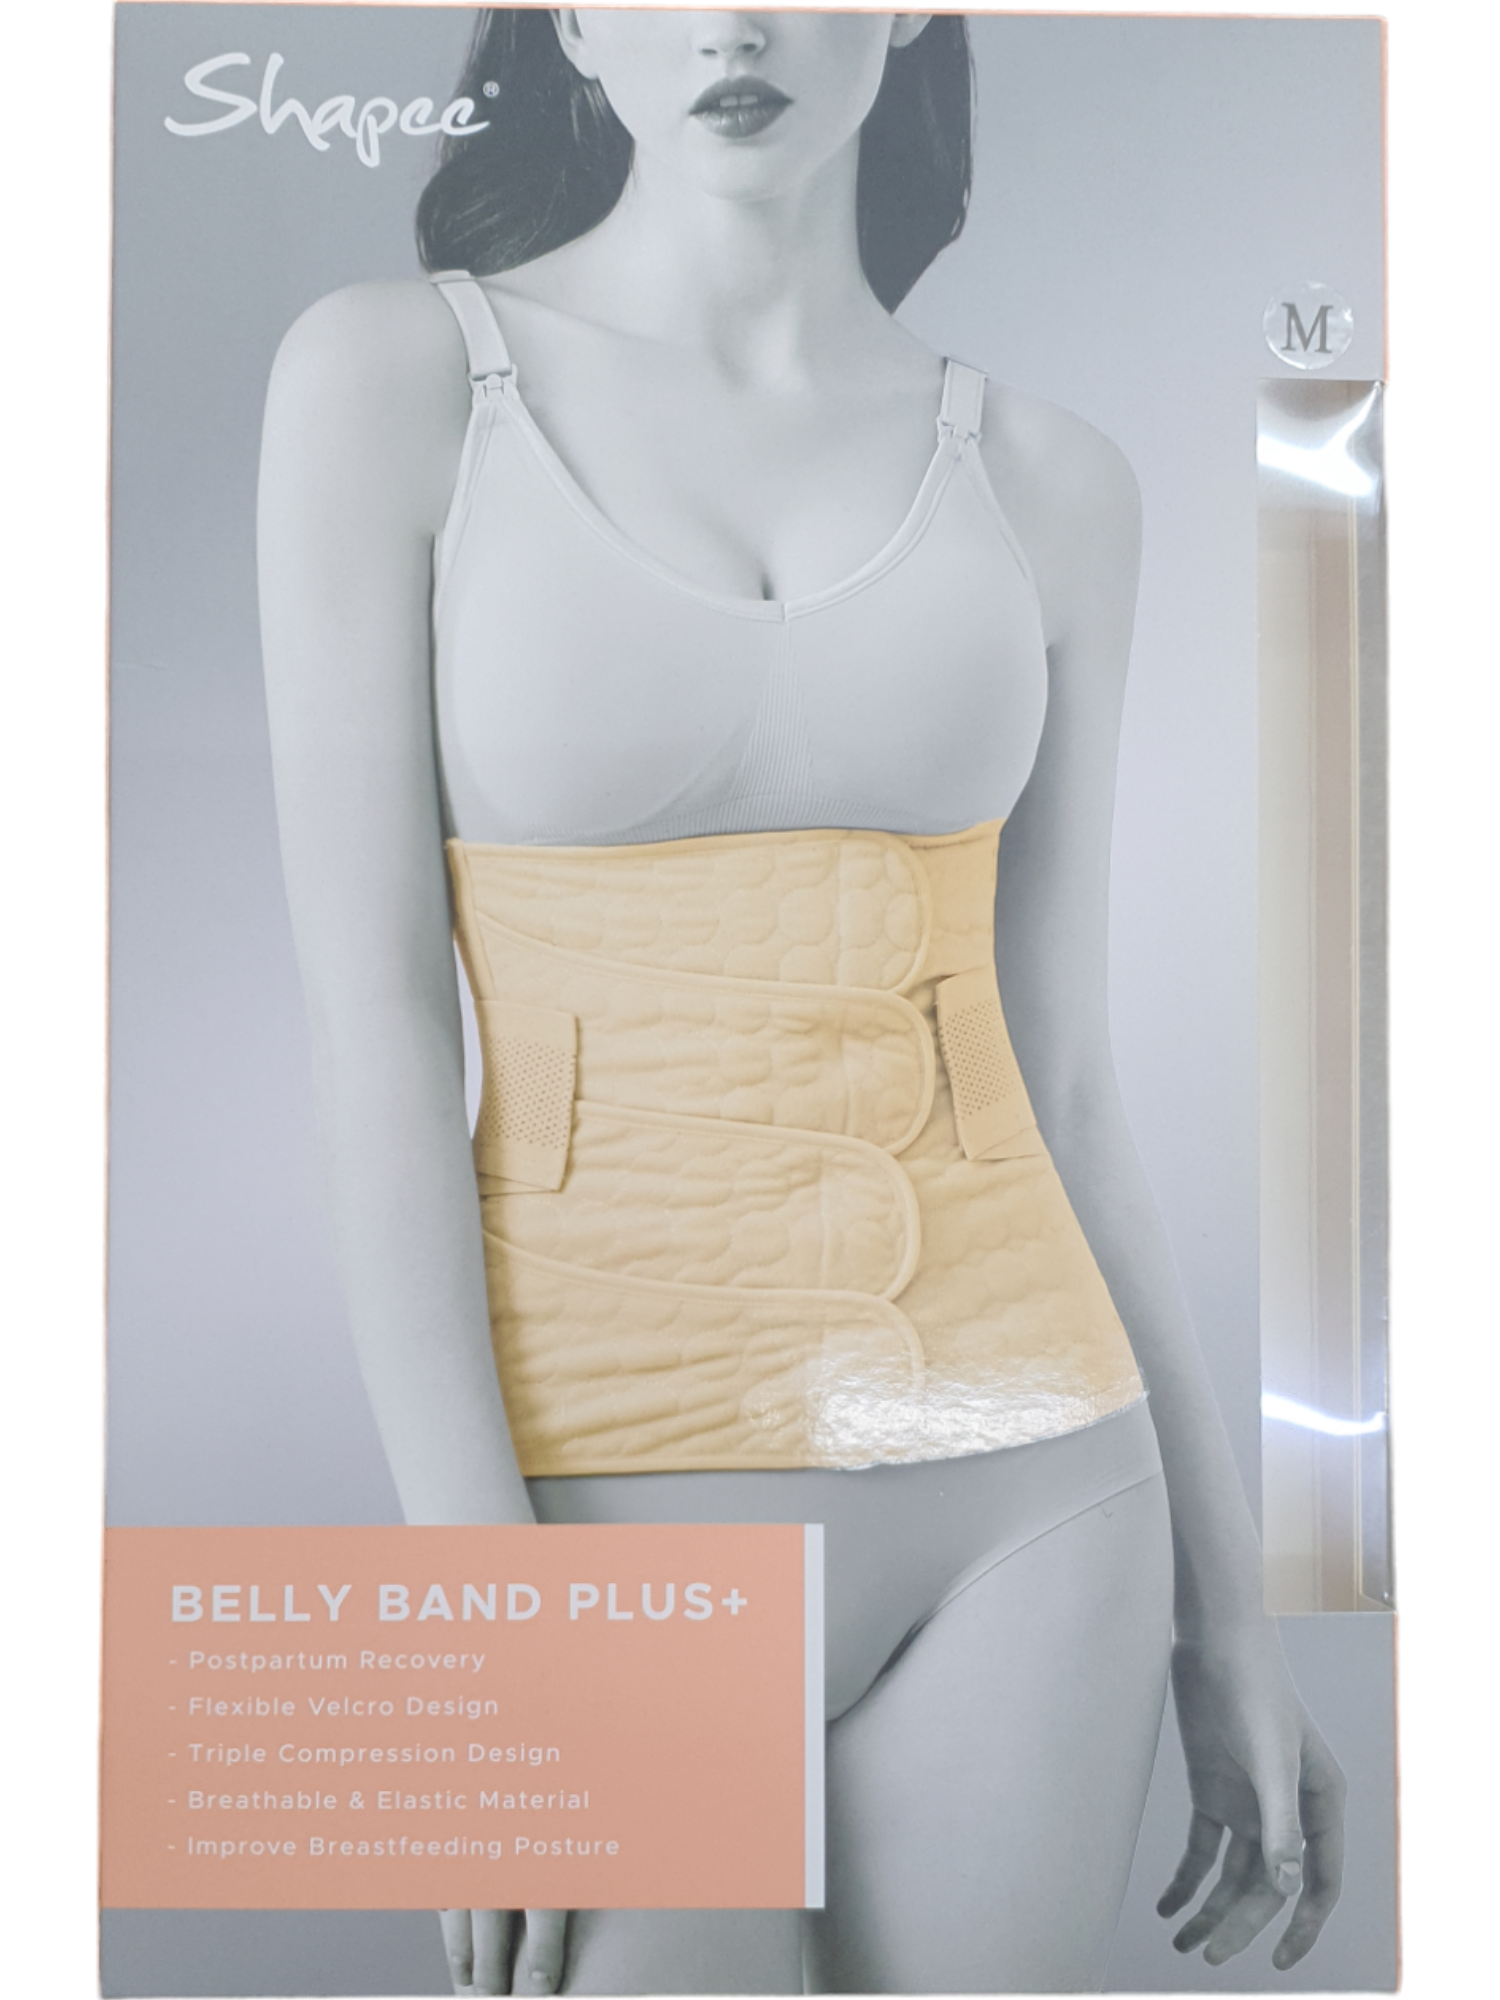 Shapee Belly Band Plus+ M